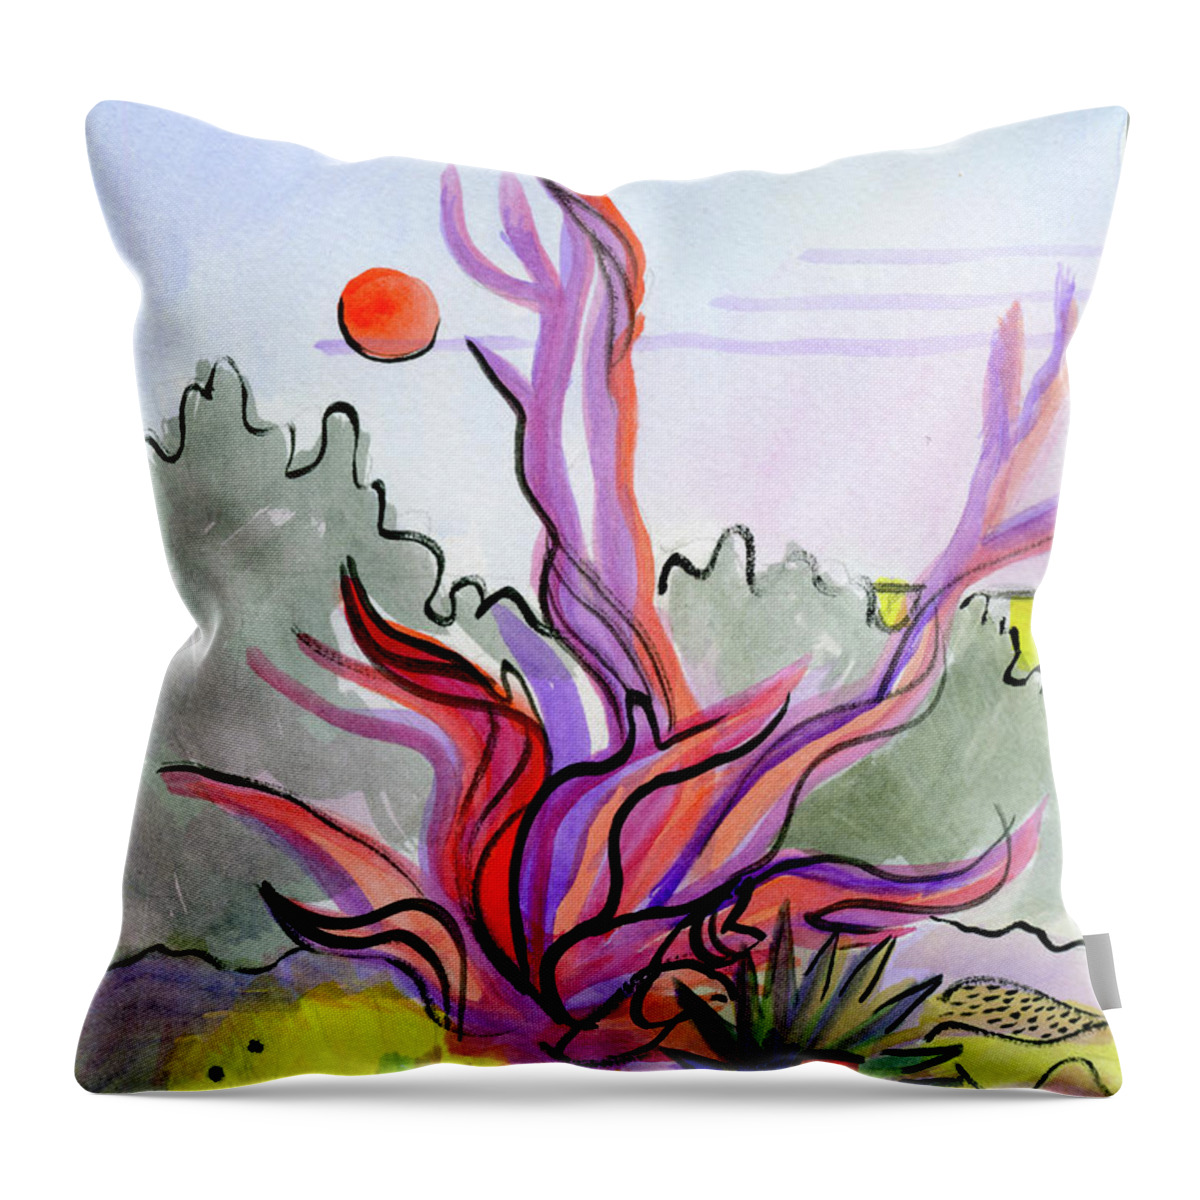 Dead Throw Pillow featuring the painting Dead Tree Moon by Madeline Dillner